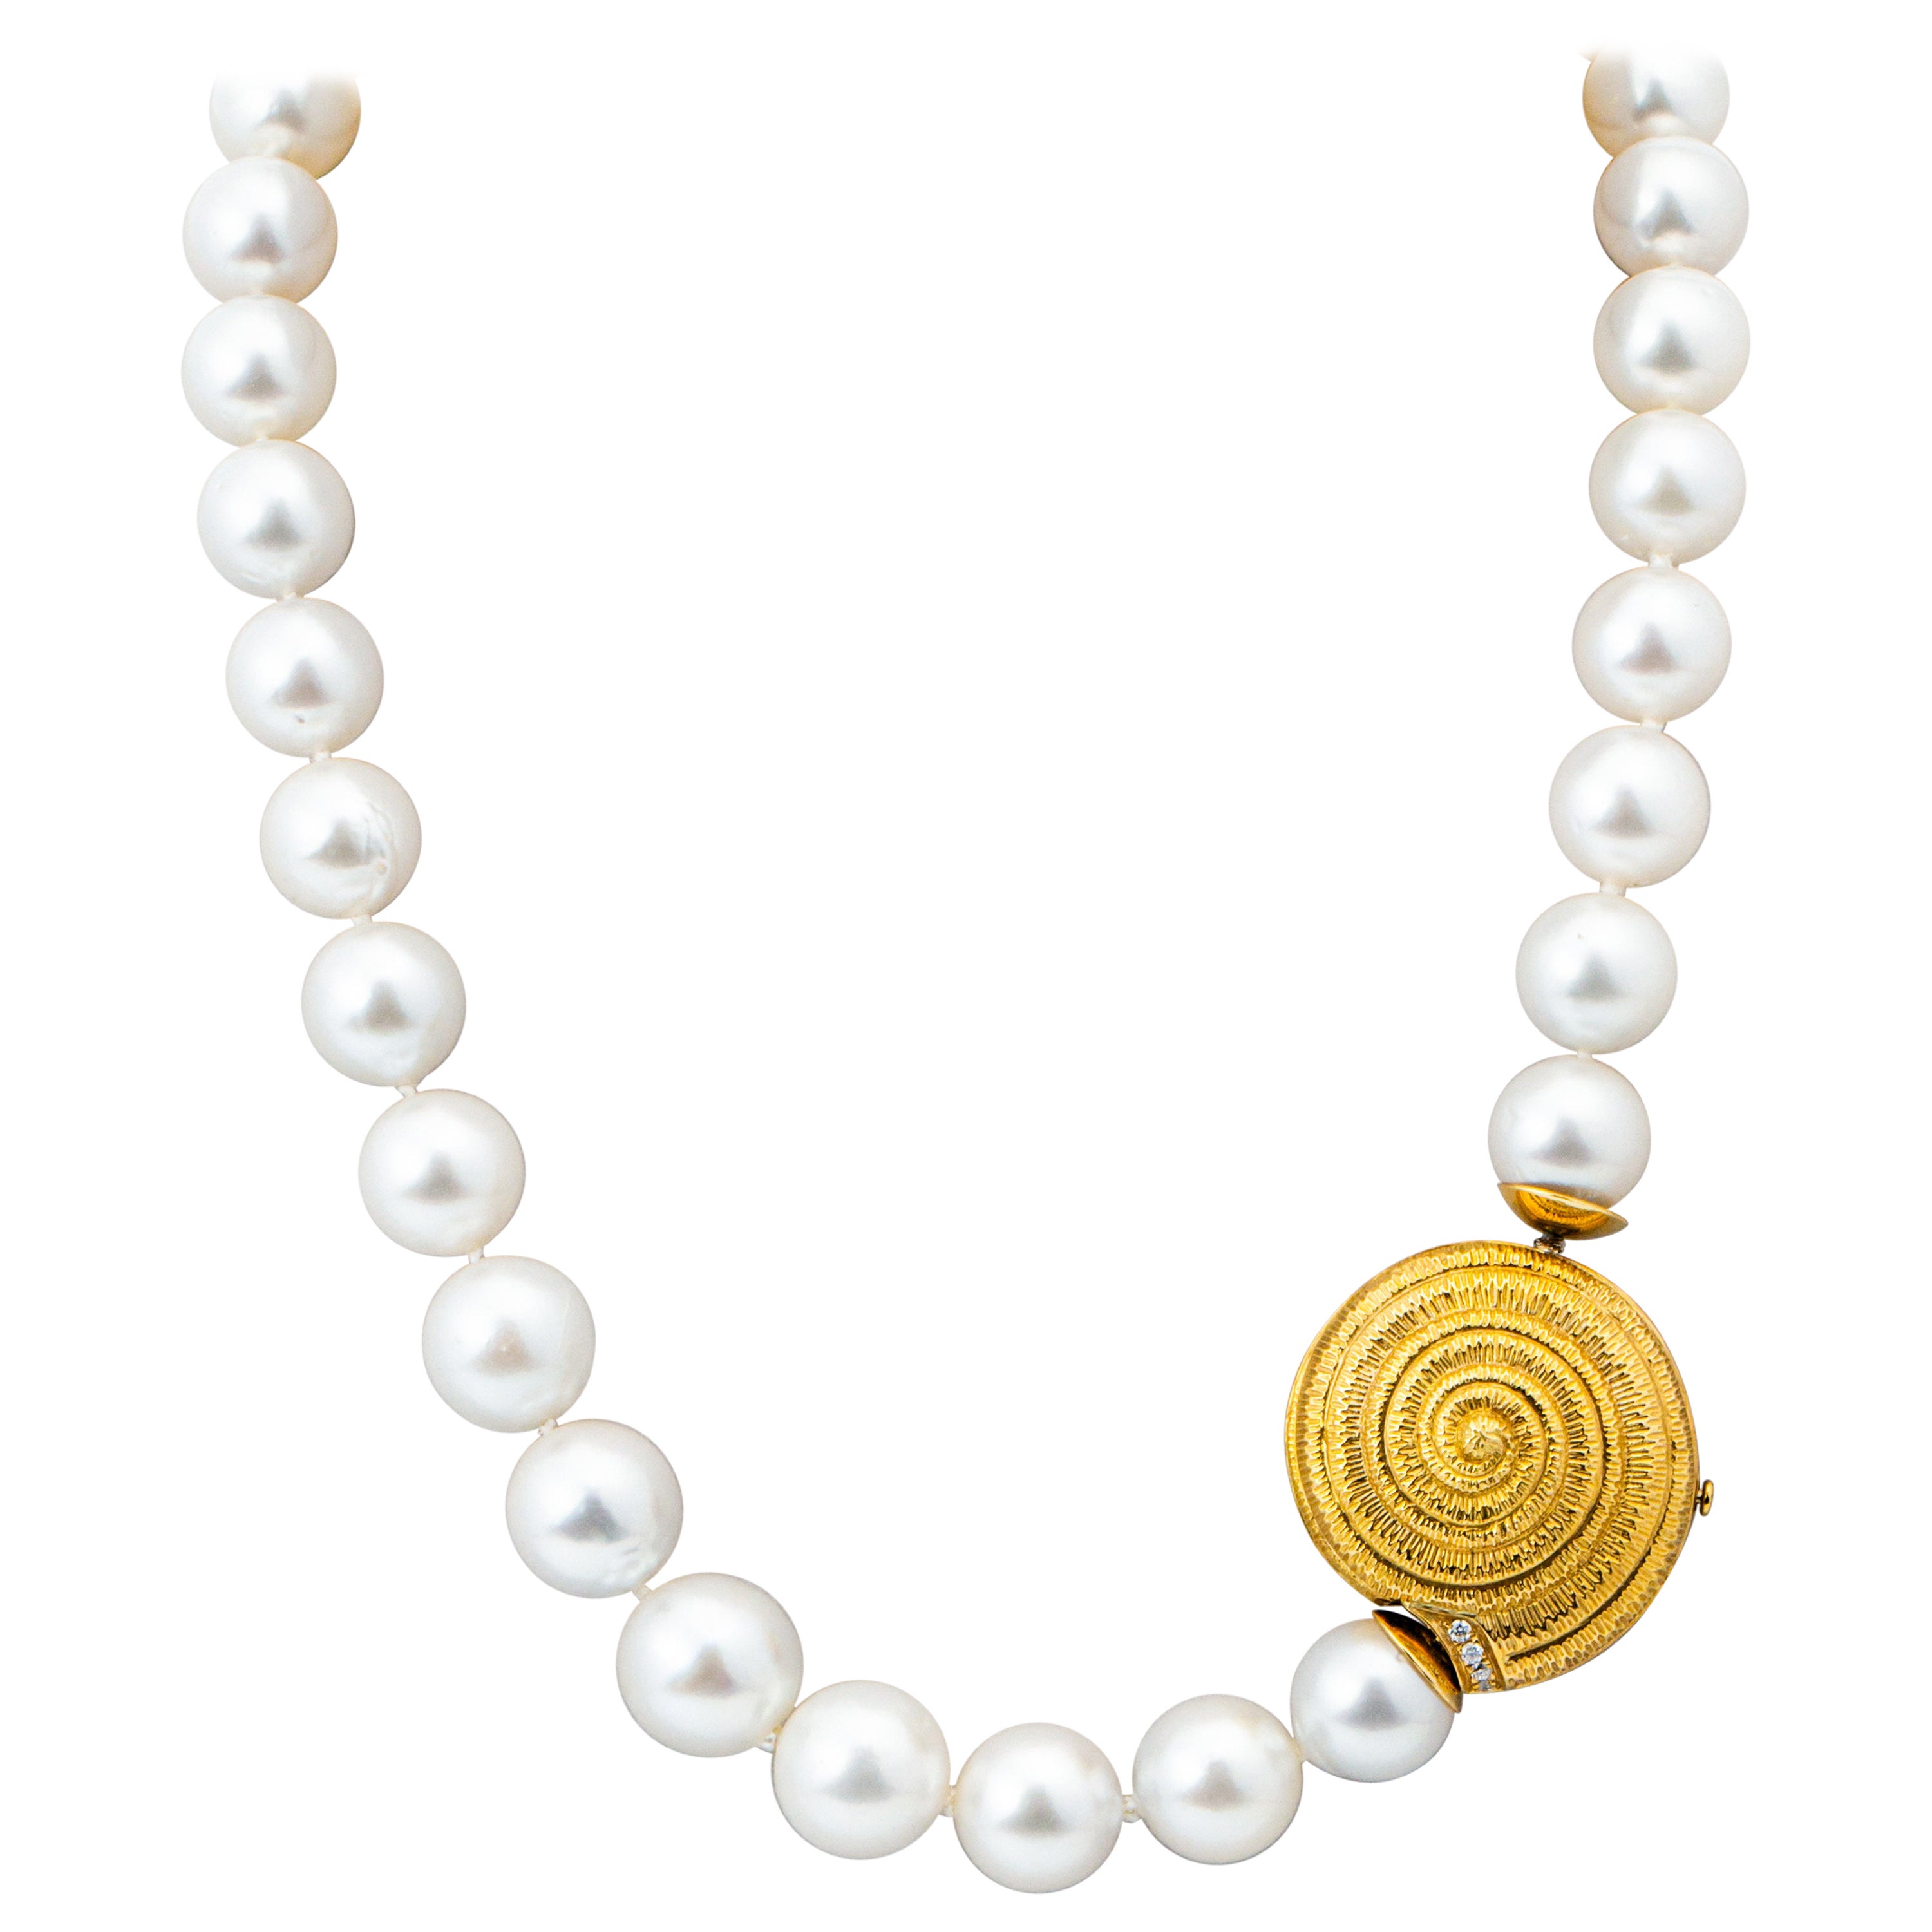 "Costis" Snail Shell White Pearls Necklace with Watch-Like Clasp